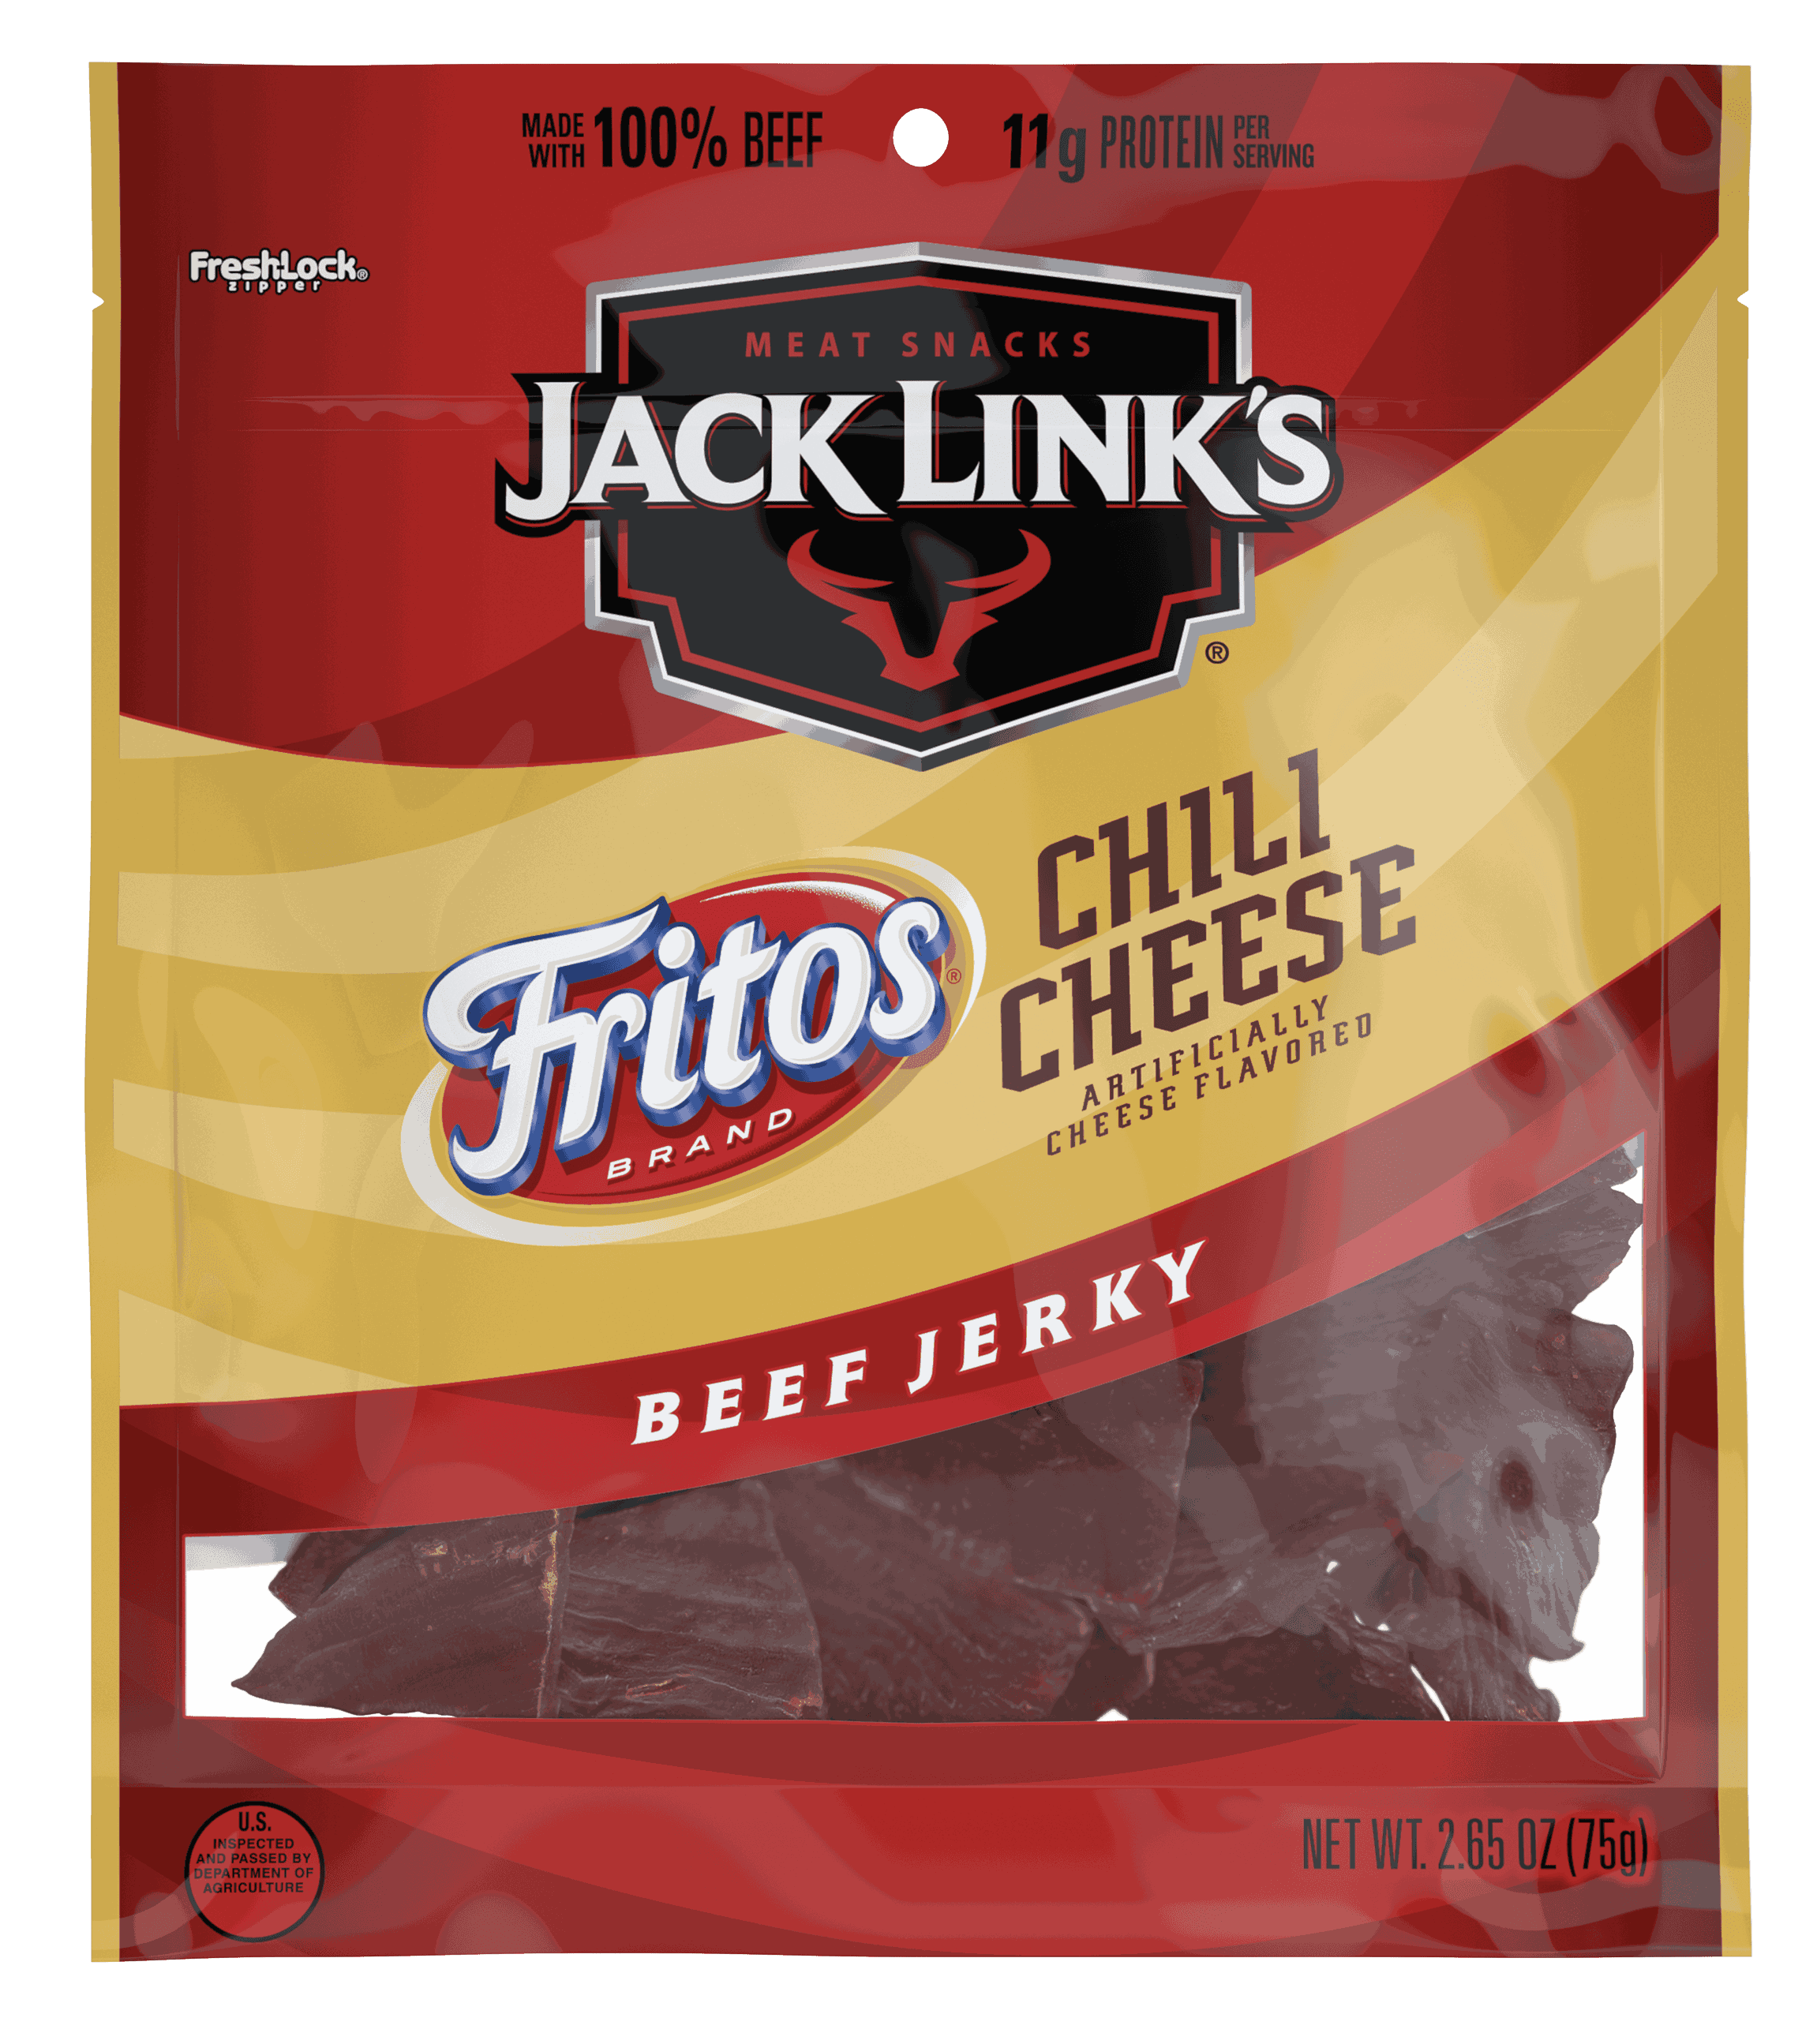 Bag of CHILI CHEESE FLAVORED BEEF JERKY